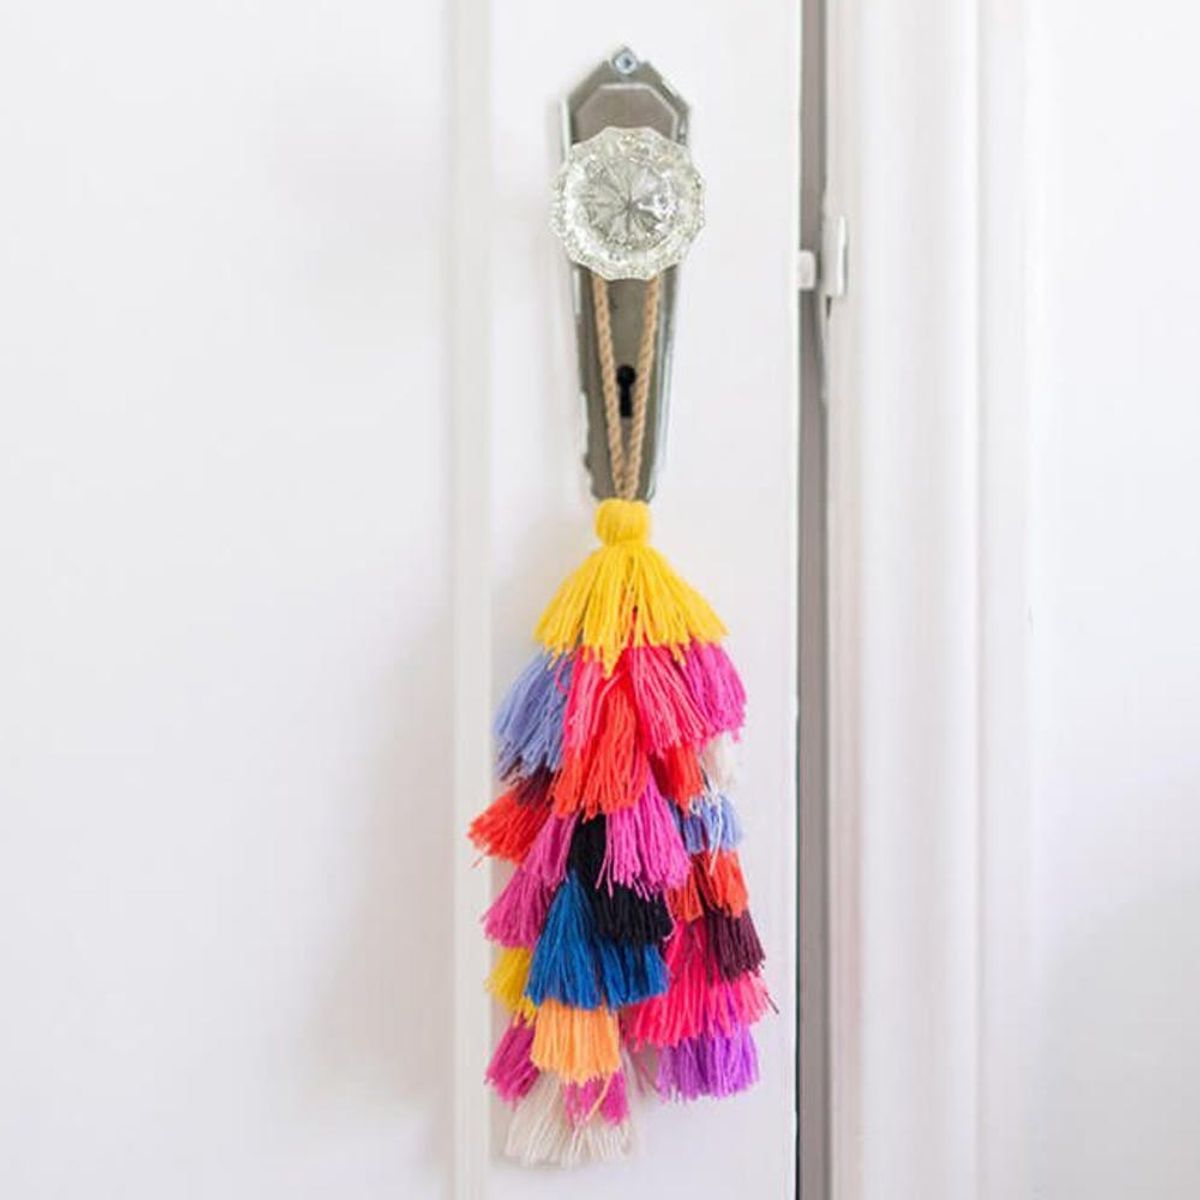 The Statement-Making Door Decor You Can DIY in 5 Minutes